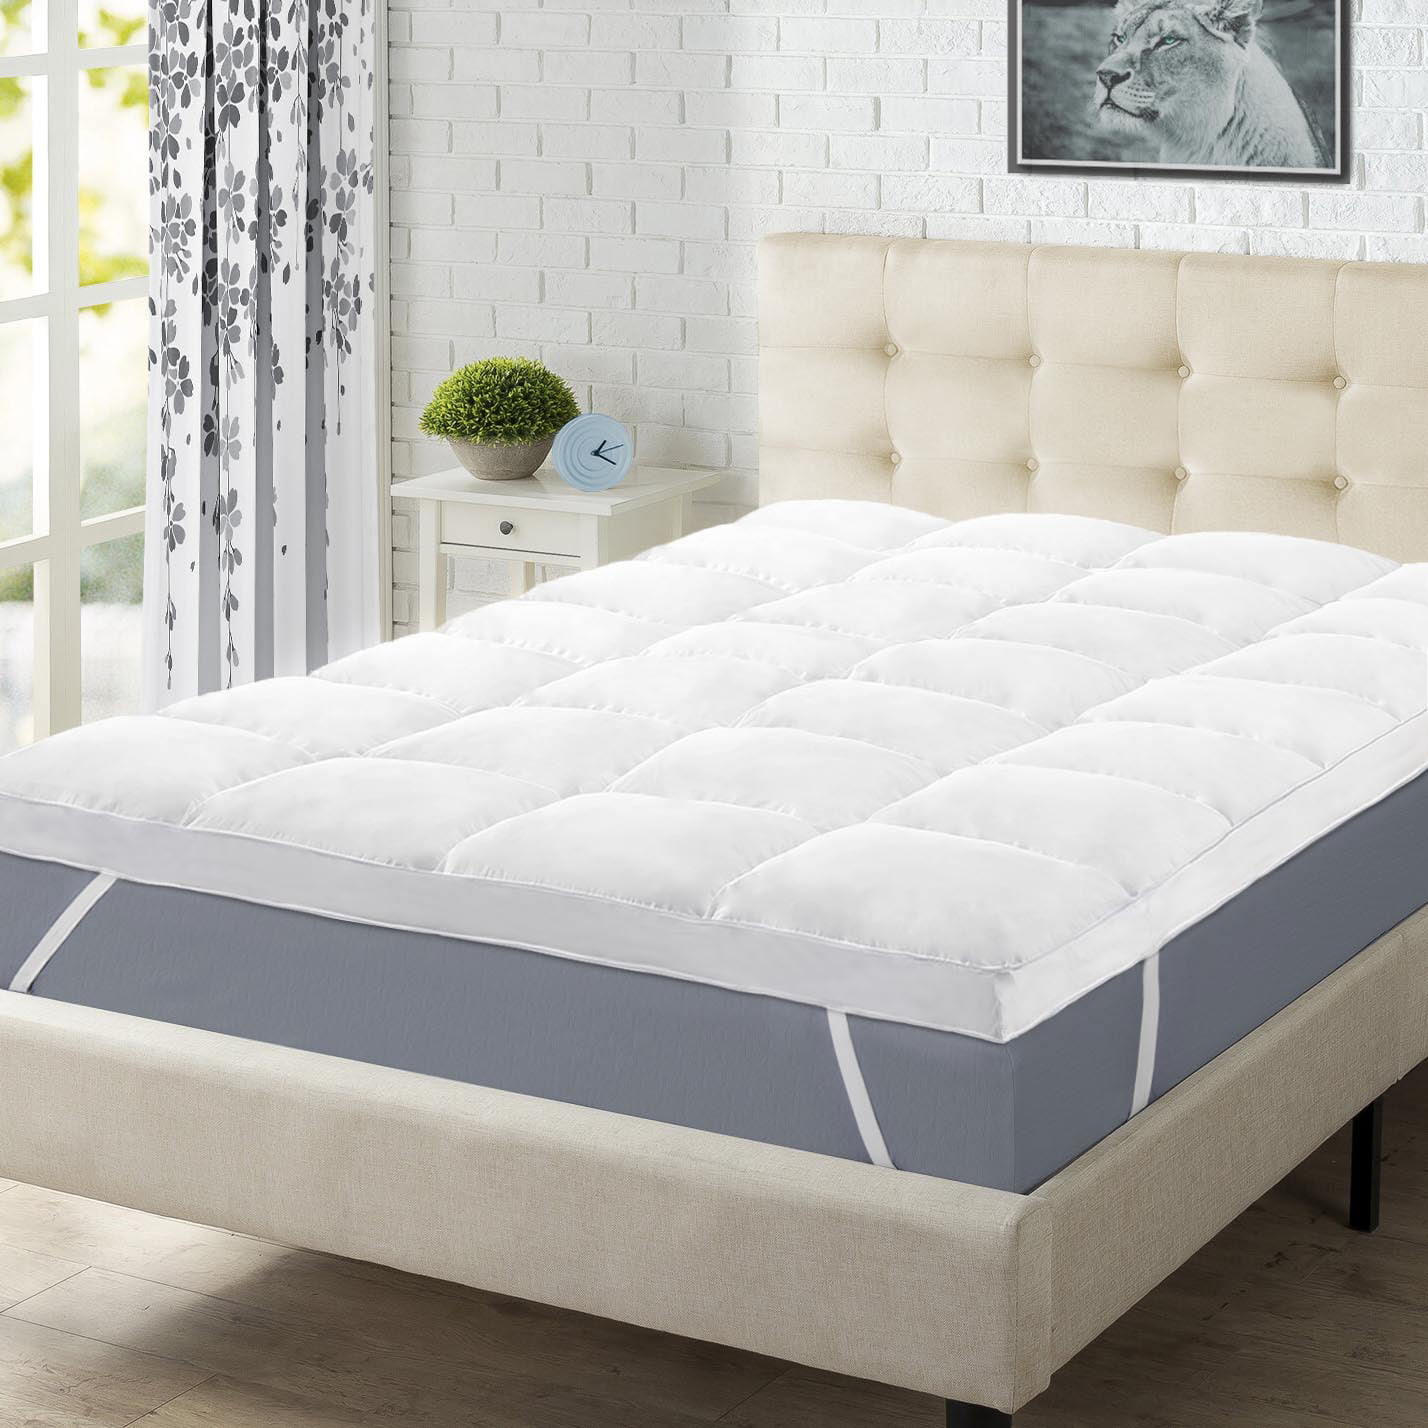 Details about   1" Quality Bamboo Memory Foam Mattress Topper Non-Allergenic Size Available King 